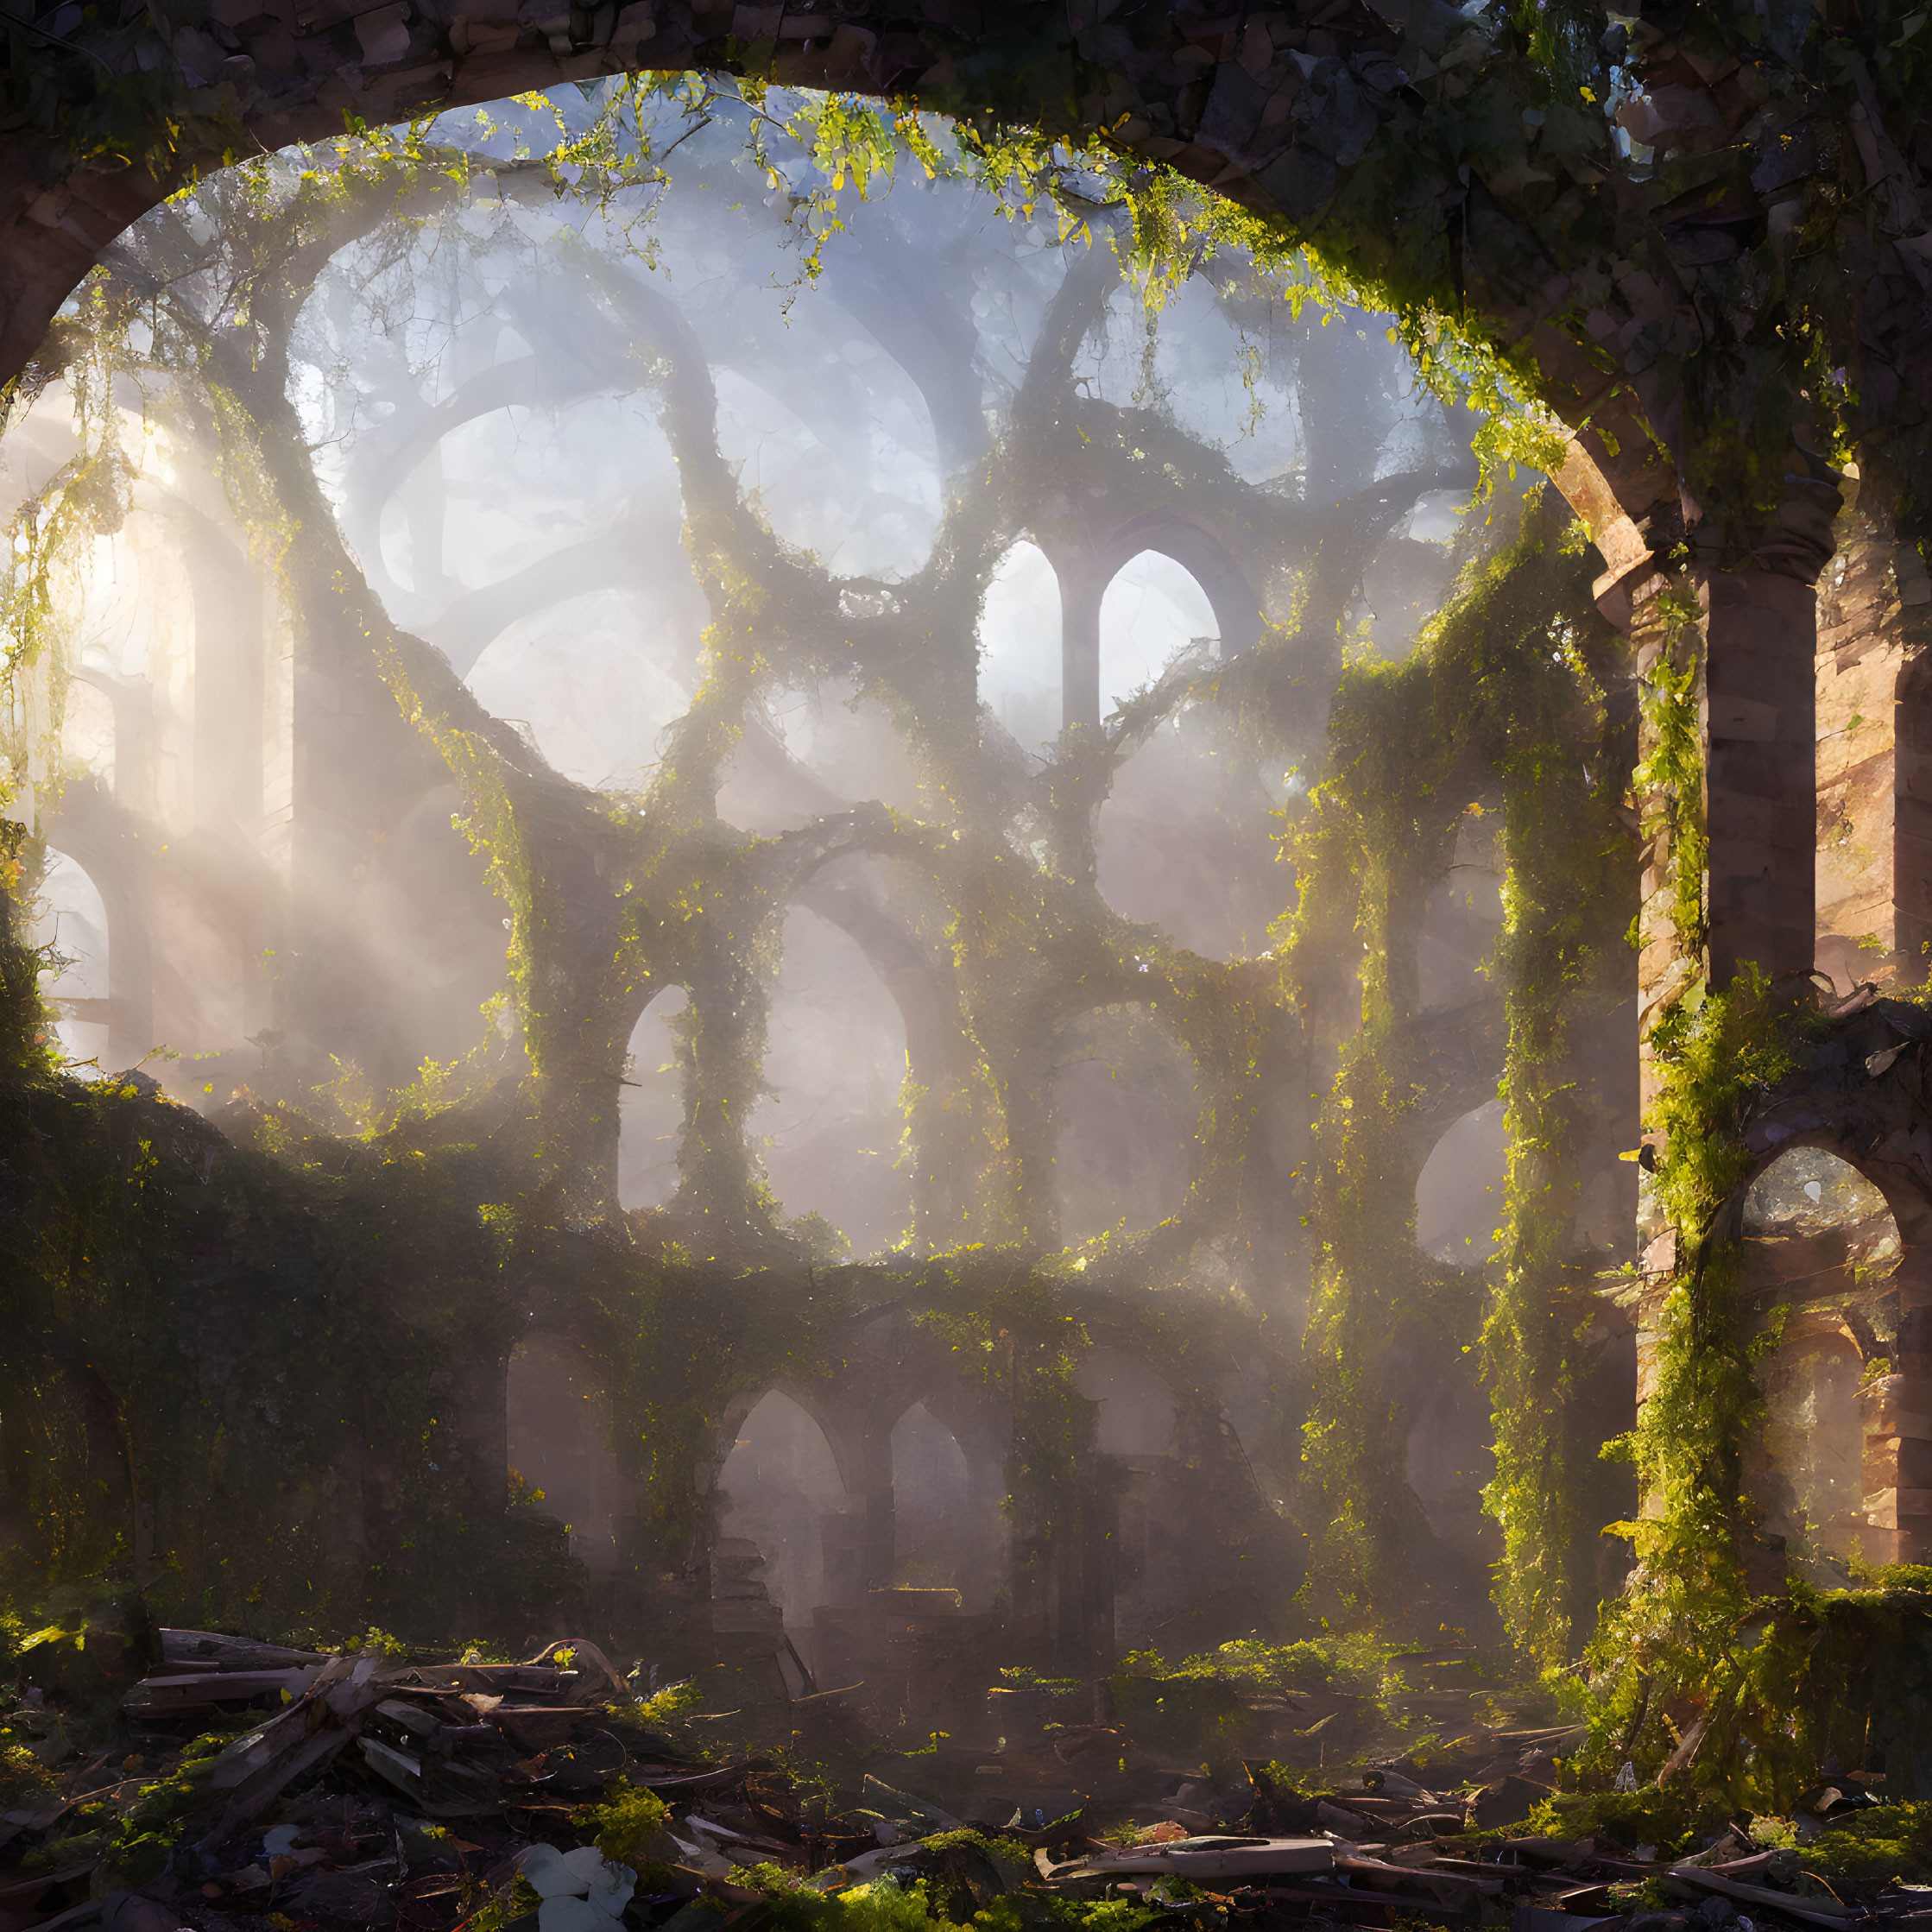 Sunlight filters through ivy-draped ruins of a Gothic church, creating mystical ambiance.